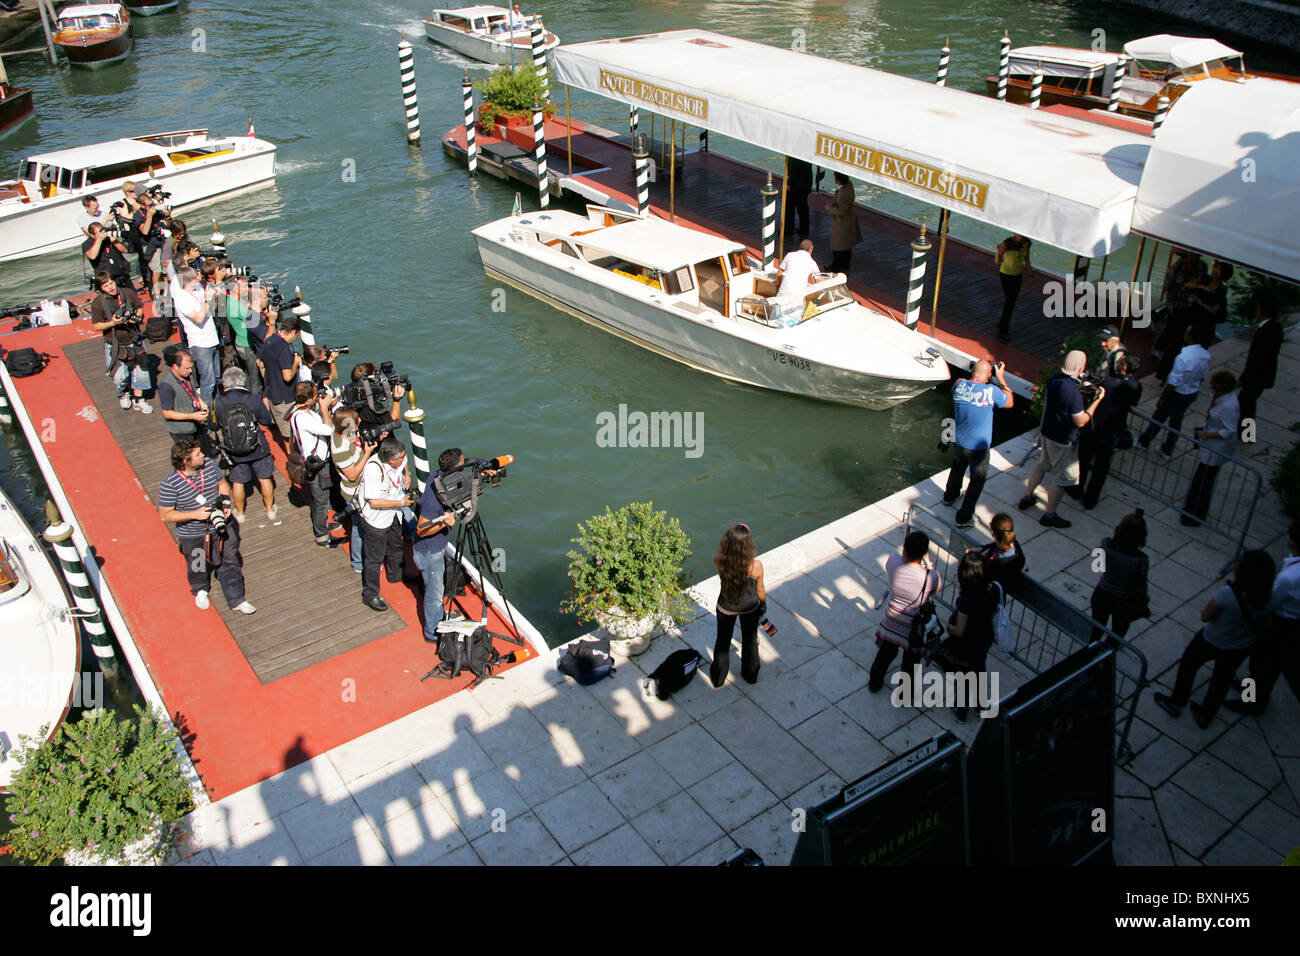 A general view of the Lido, Venice as members of the media await celebrities outside the hotel excelsior during th eVenice film Festival Stock Photo